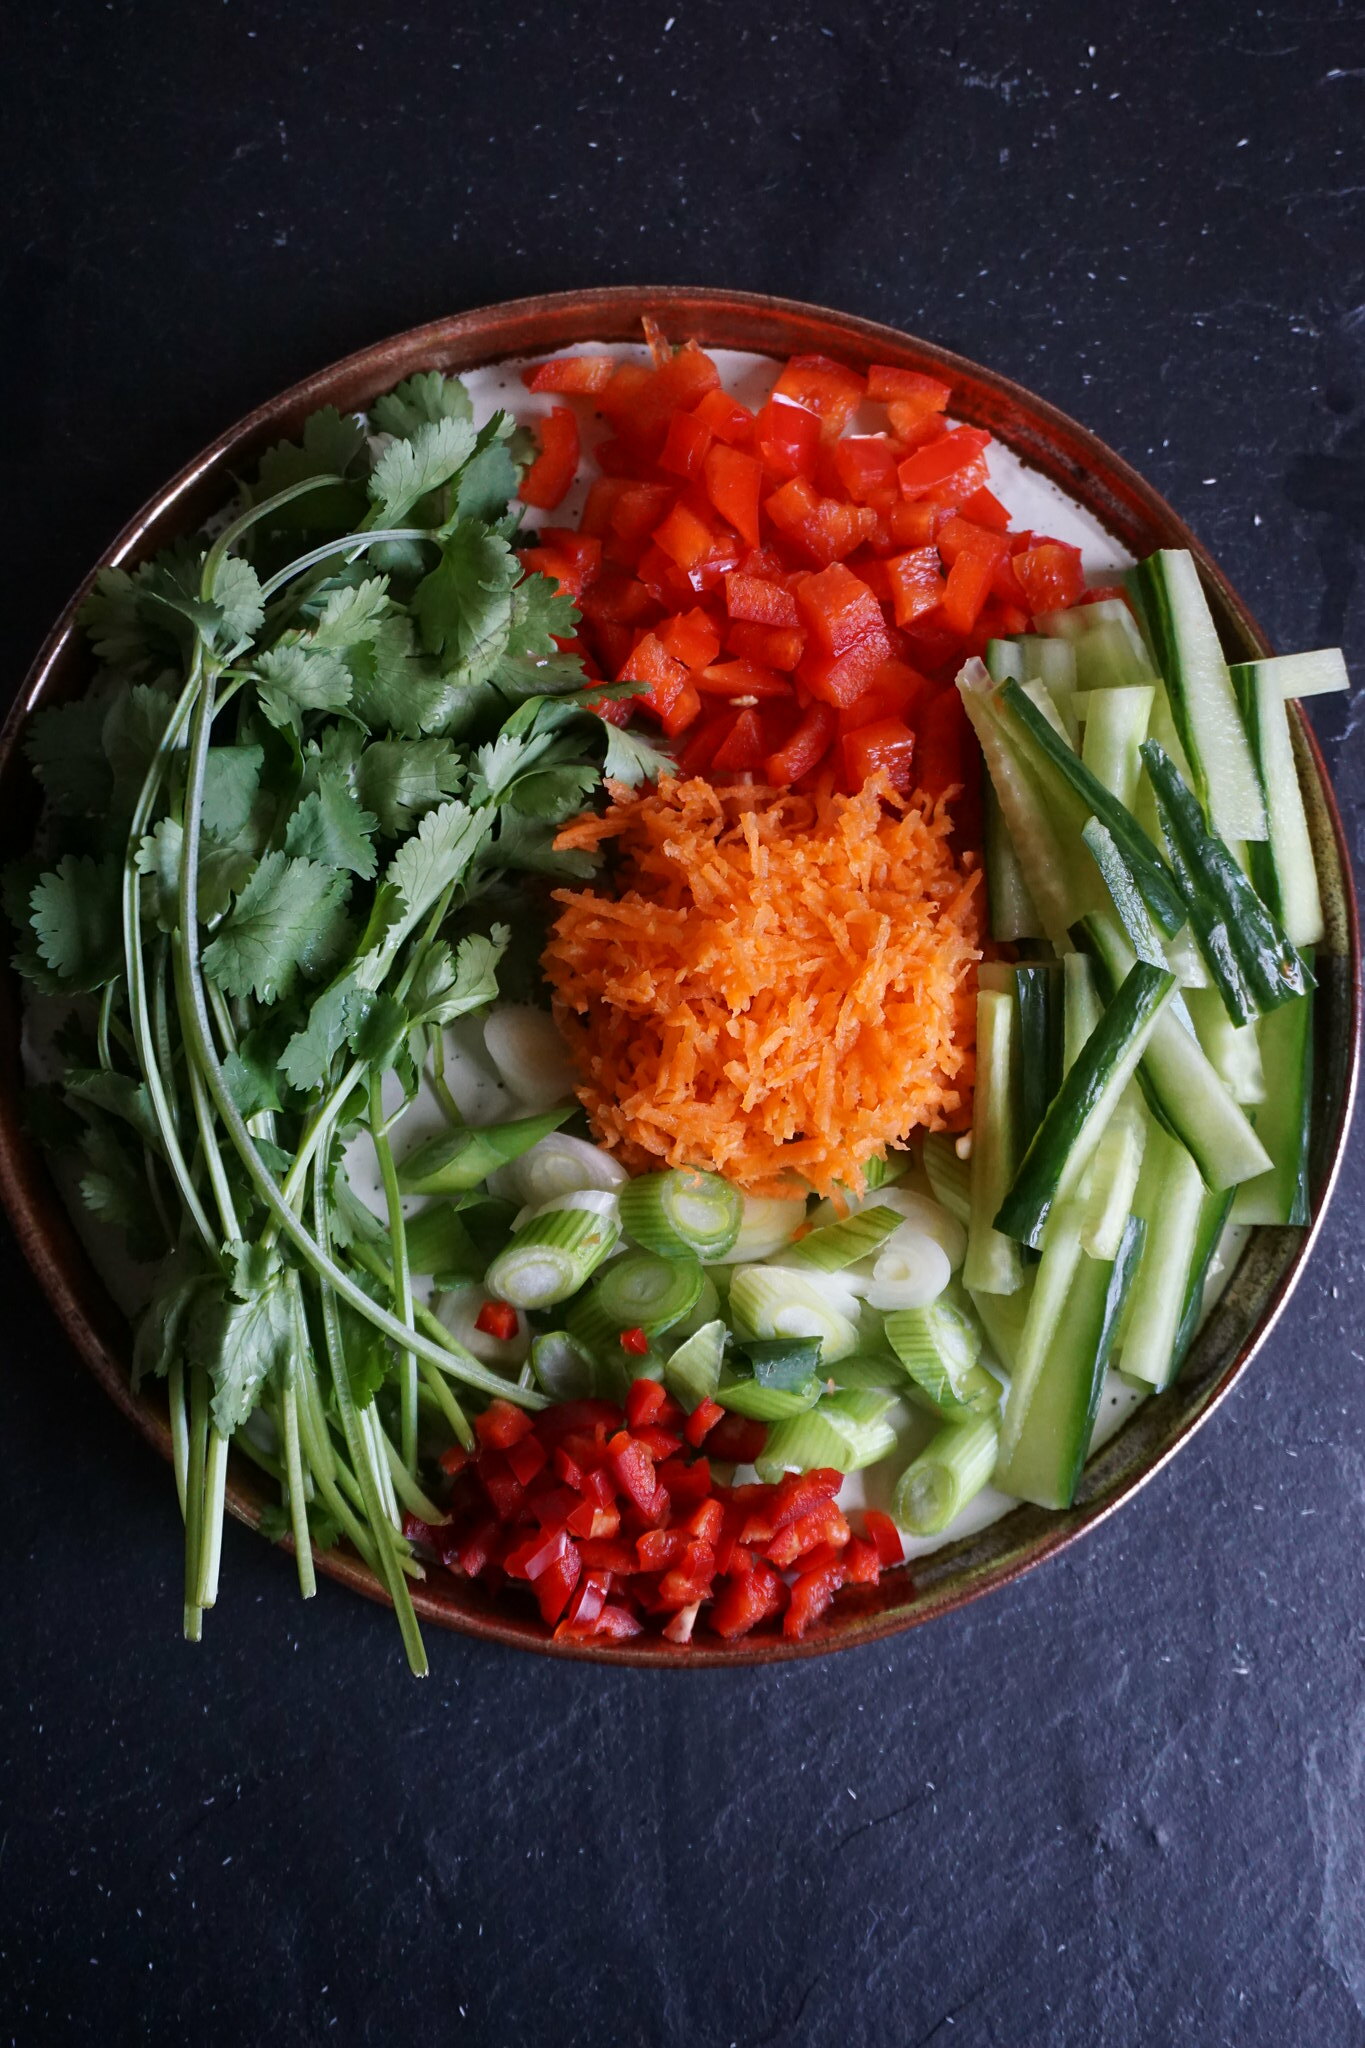 Toppings for gluten free Chinese crispy duck lettuce wraps - coriander, bell pepper, cucumber, chilli, spring onions and grated carrots